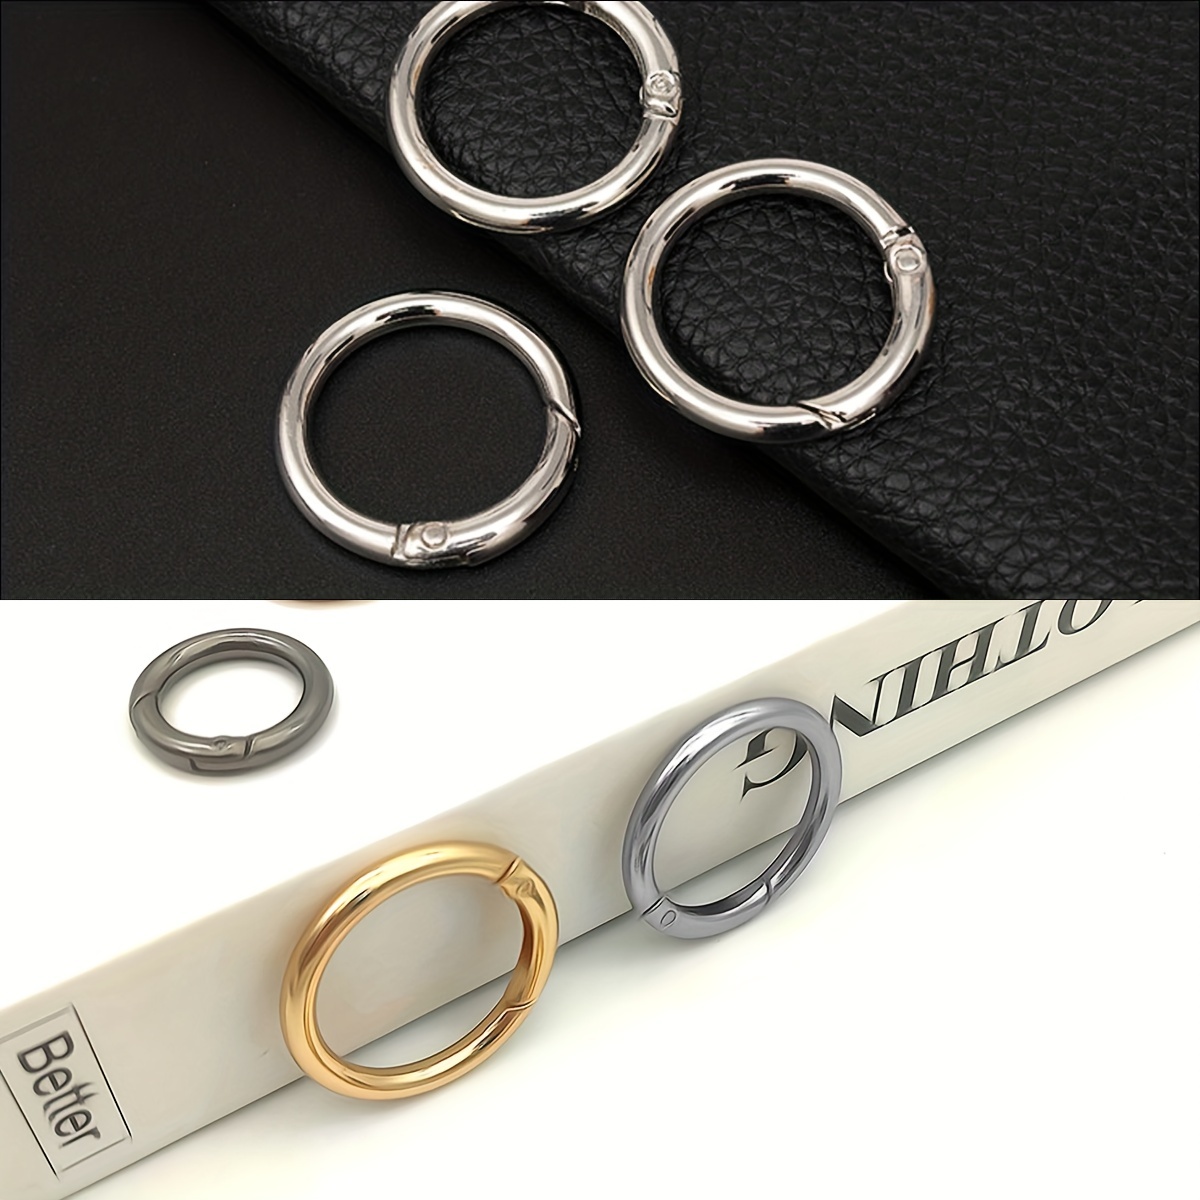 2 Inch Flat Key Rings - Large Split Key Rings - Silver Steel Round Edged  Circular Keychain Ring Clips - Sturdy Key Chain Ring Connector (Pack of 10)